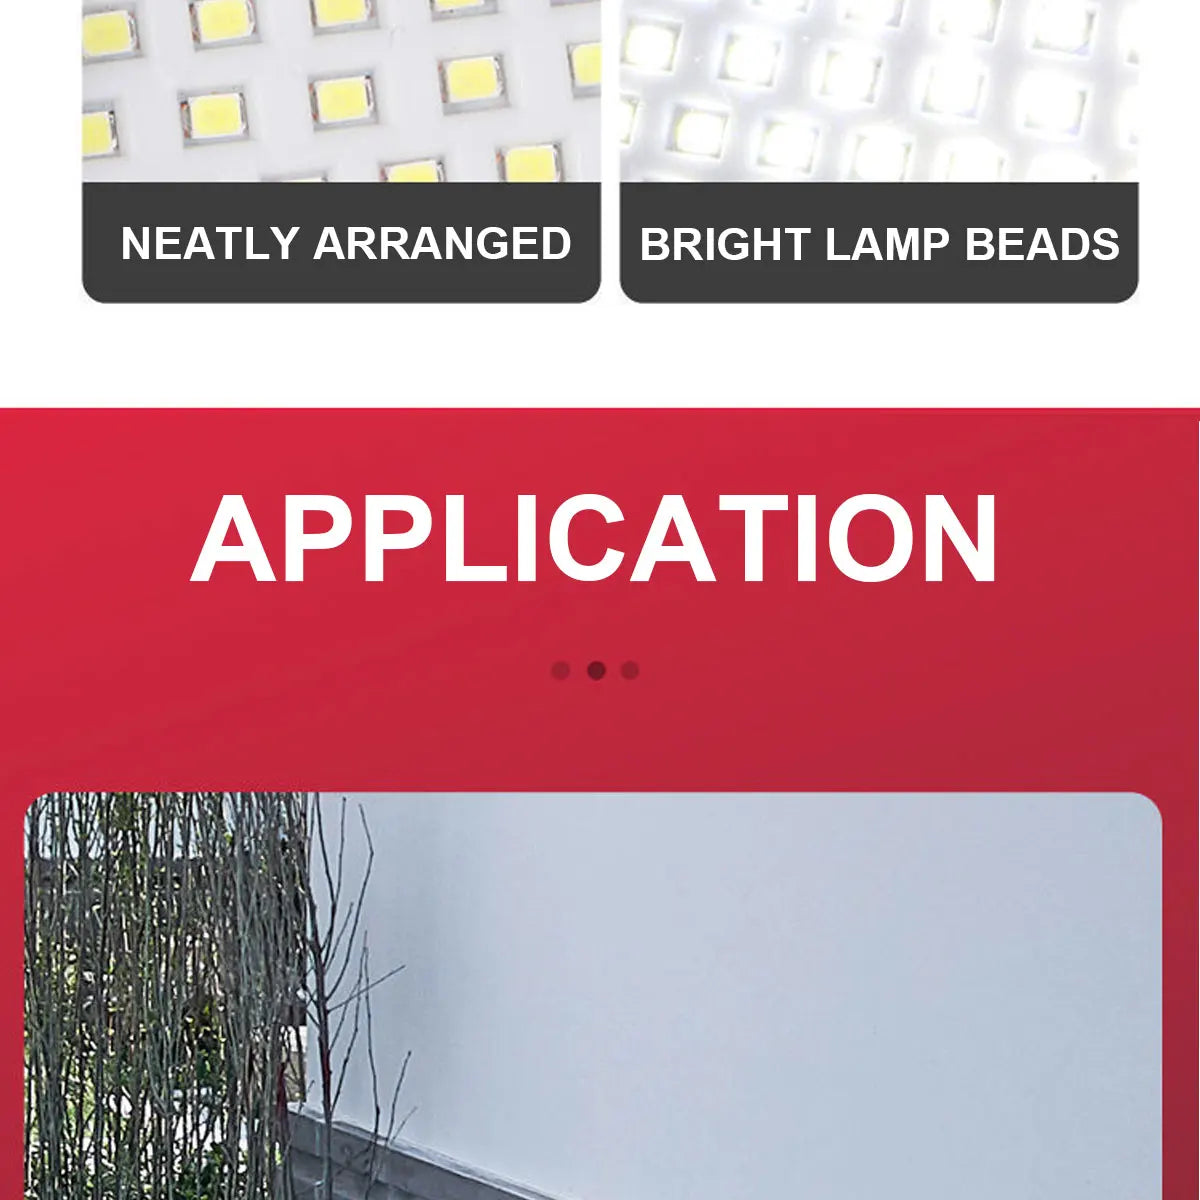 Bright LED beads neatly arranged for a charming outdoor lamp application.